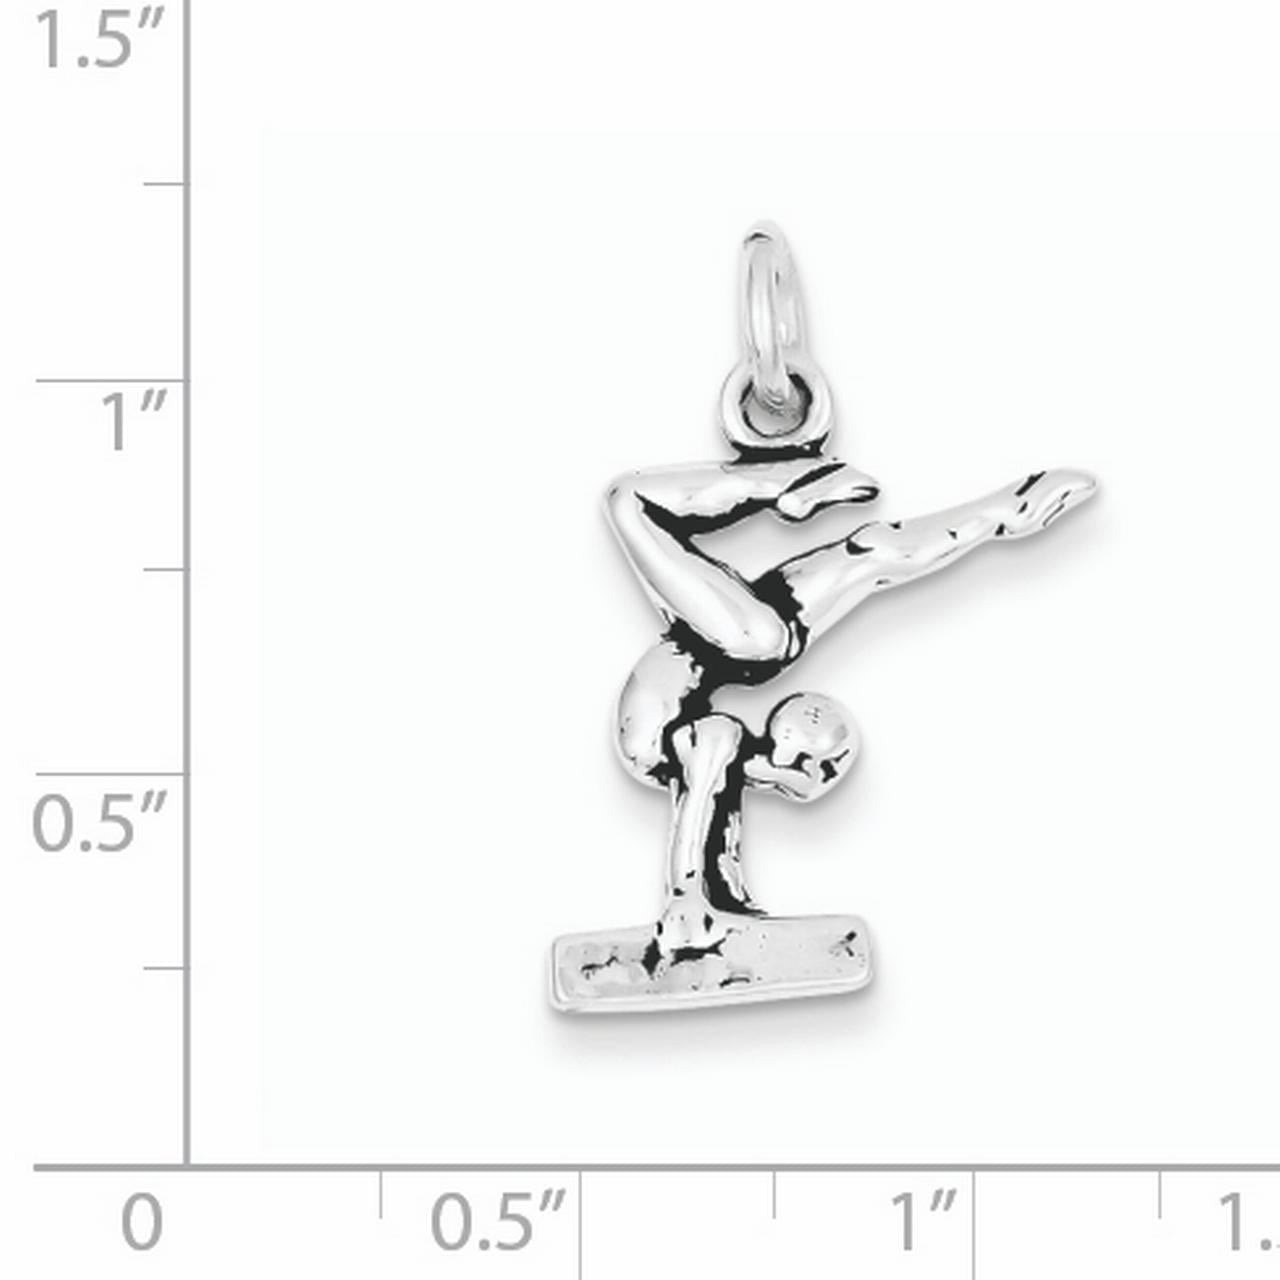 Sterling Silver Sailboat Charm 0.9IN long x 0.7IN wide